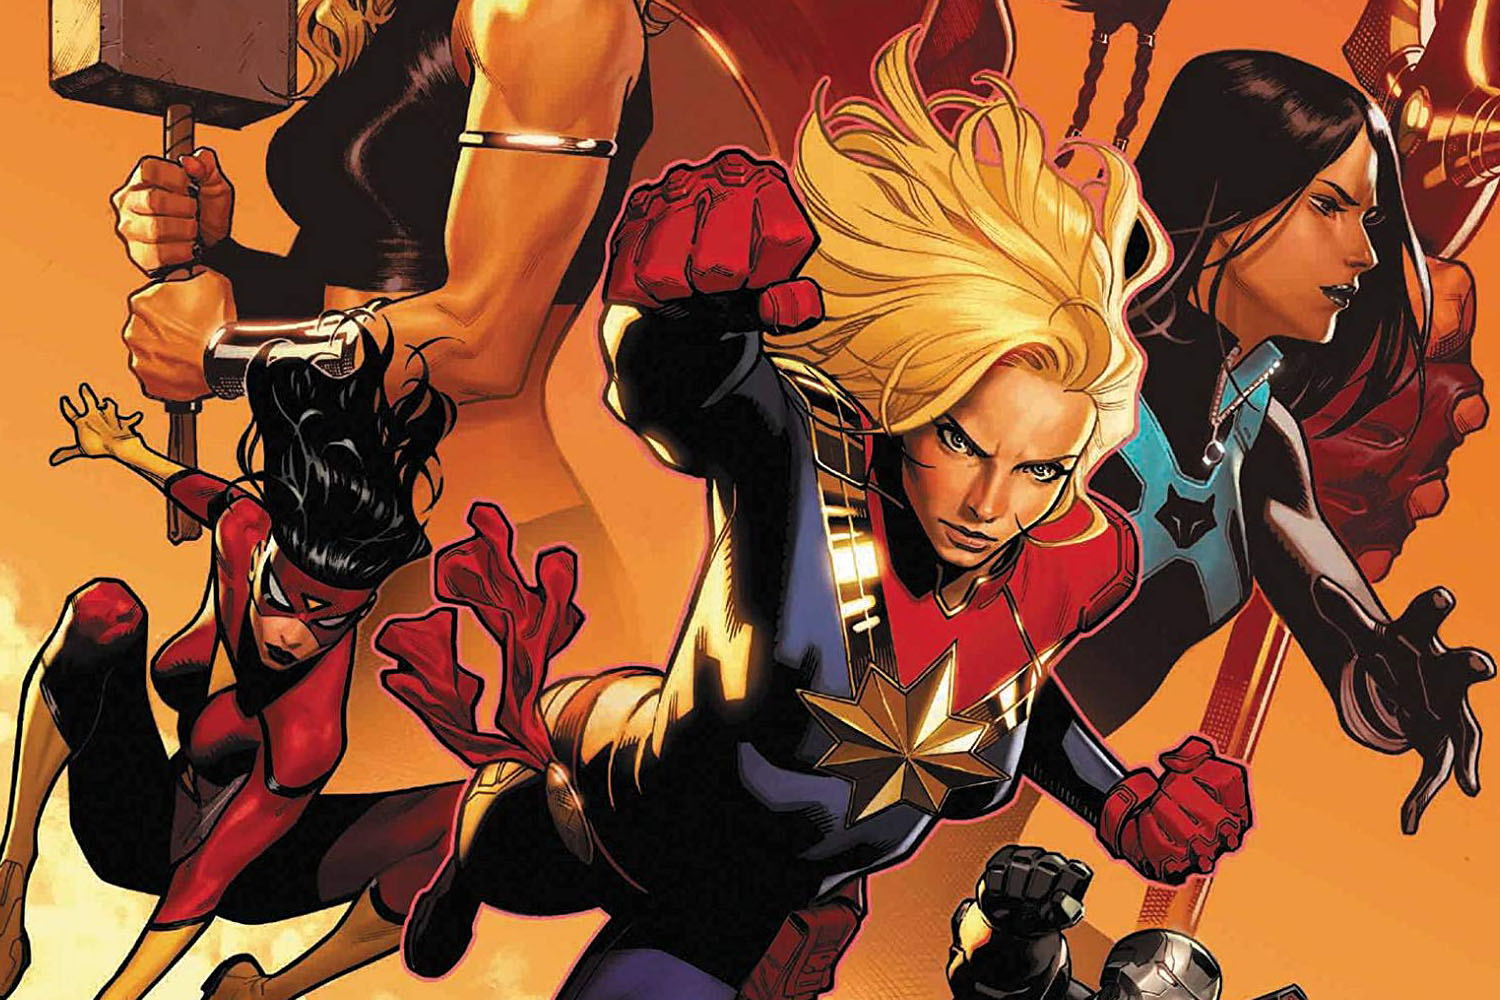 'Captain Marvel Vol. 5: The New World' is an exciting new challenge for Carol Danvers